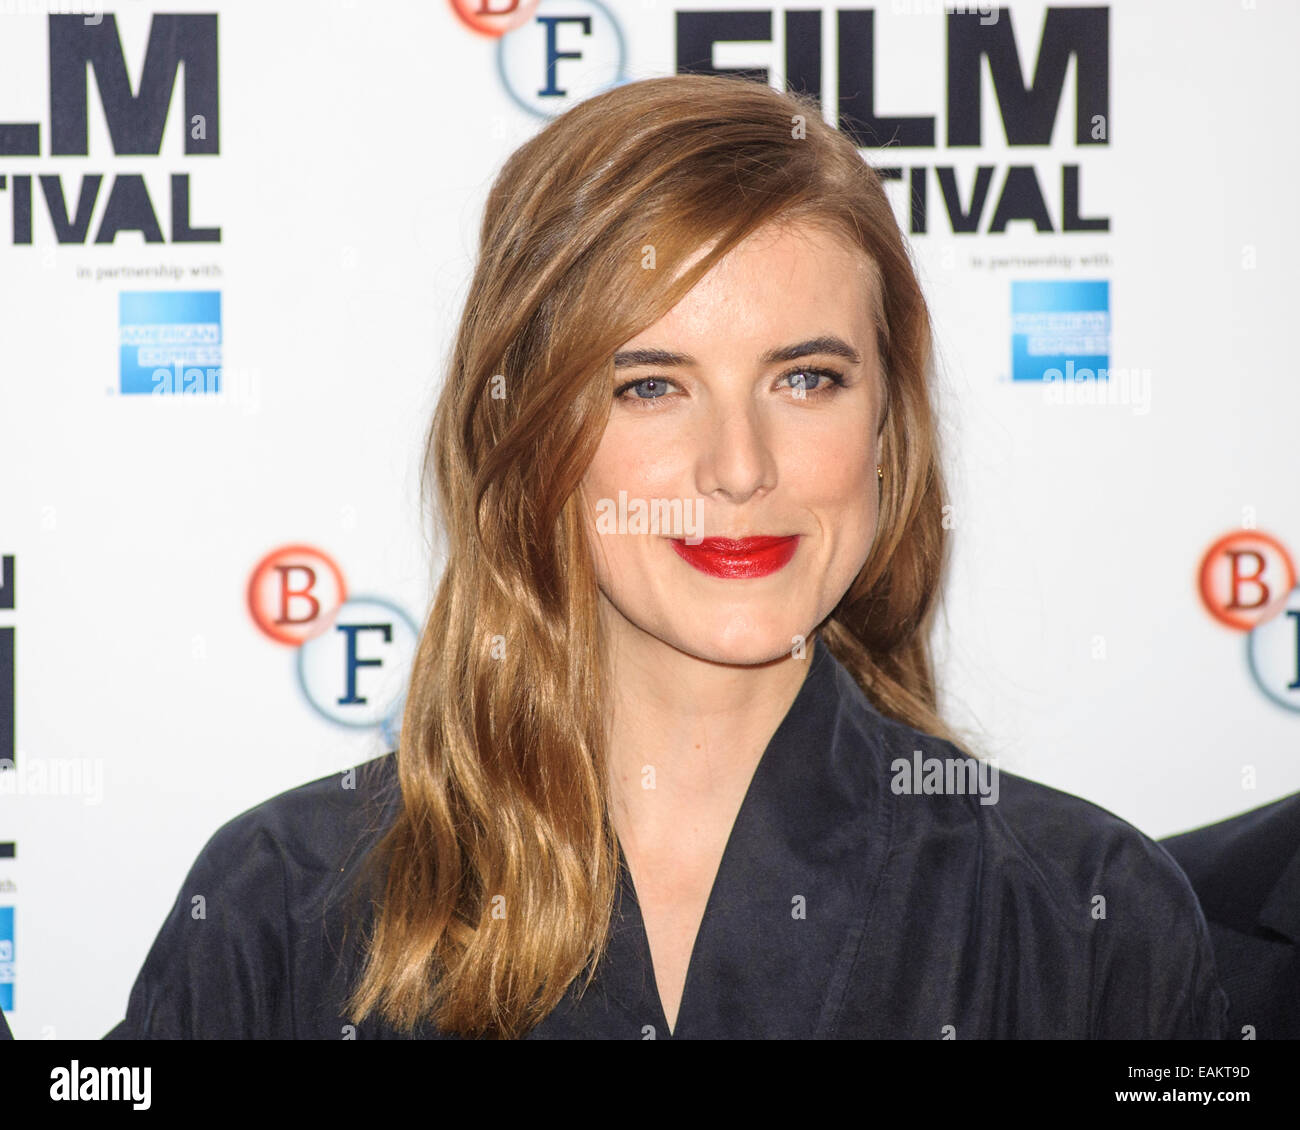 Actor Agyness Deyn attends the ELECTRICITY WORLD PREMIERE  at The BFI London Film Festival on 14/10/2014 at The VUE West End, London. Persons pictured: Agyness Deyn. Picture by Julie Edwards Stock Photo